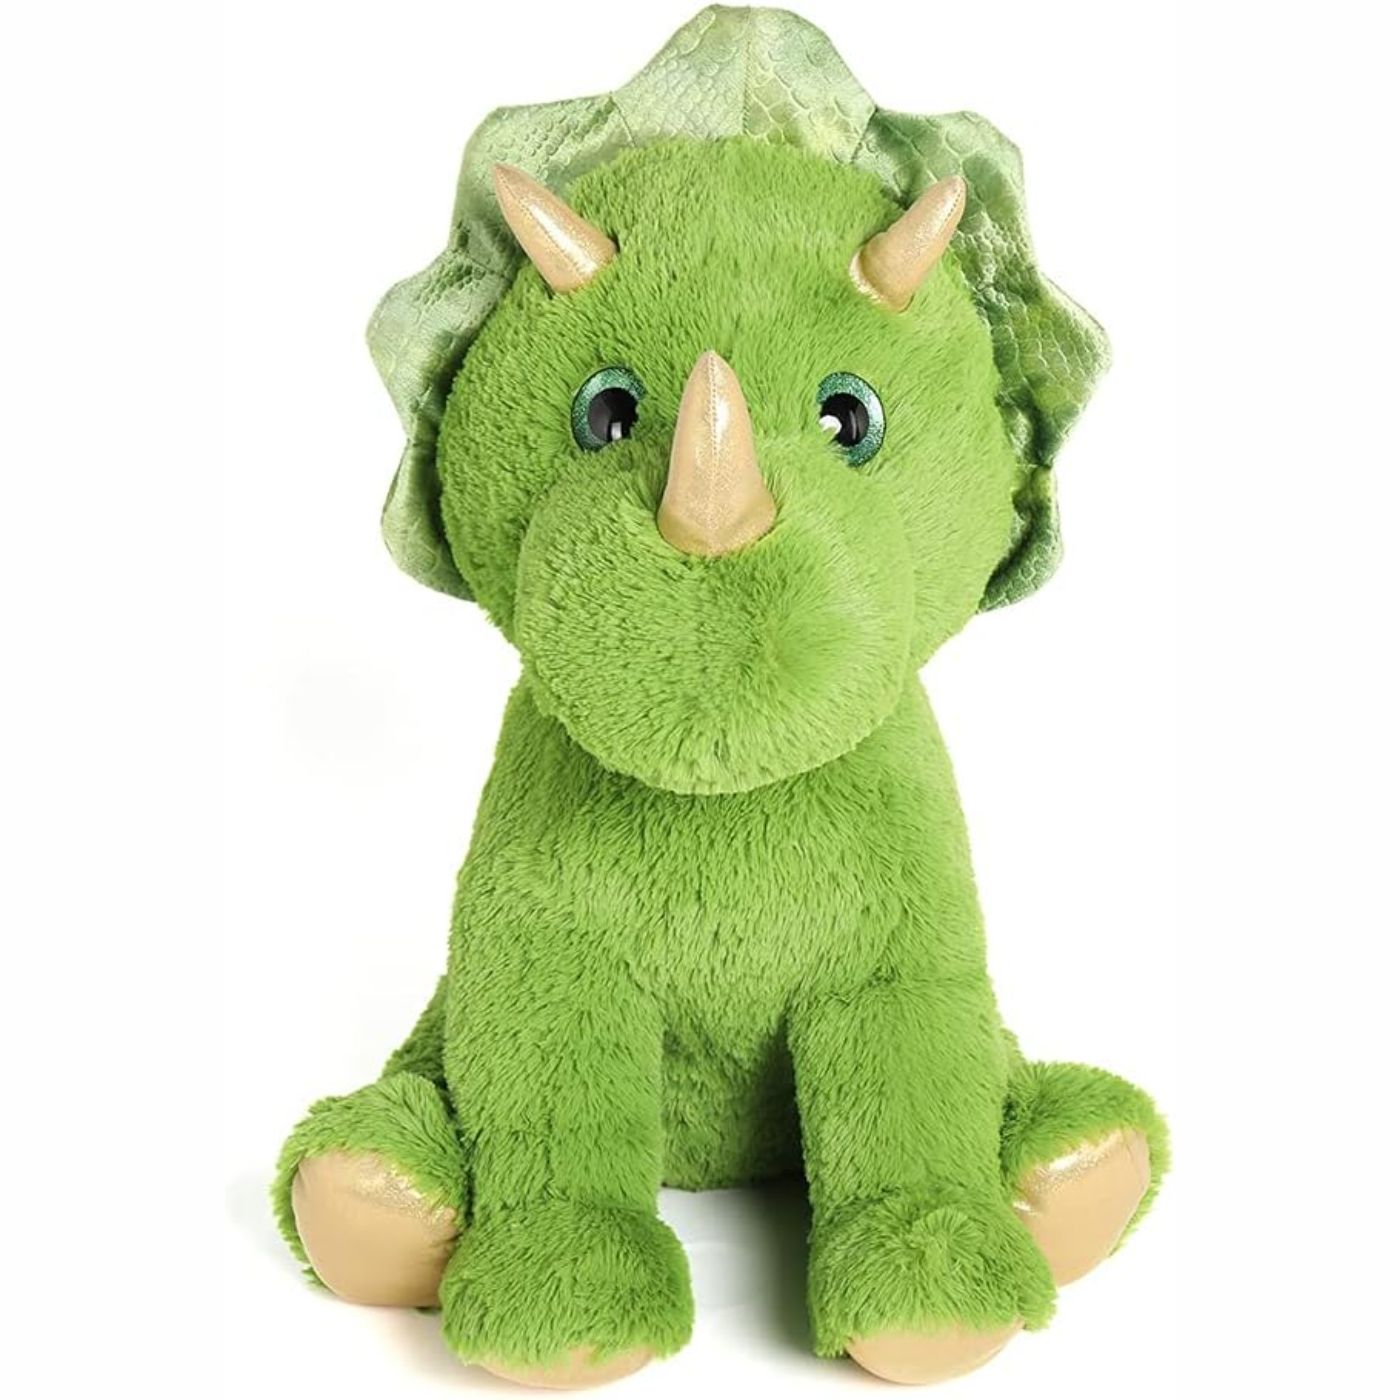 Triceratops Dinosaur Plush Toy, Green, 24.4 Inches